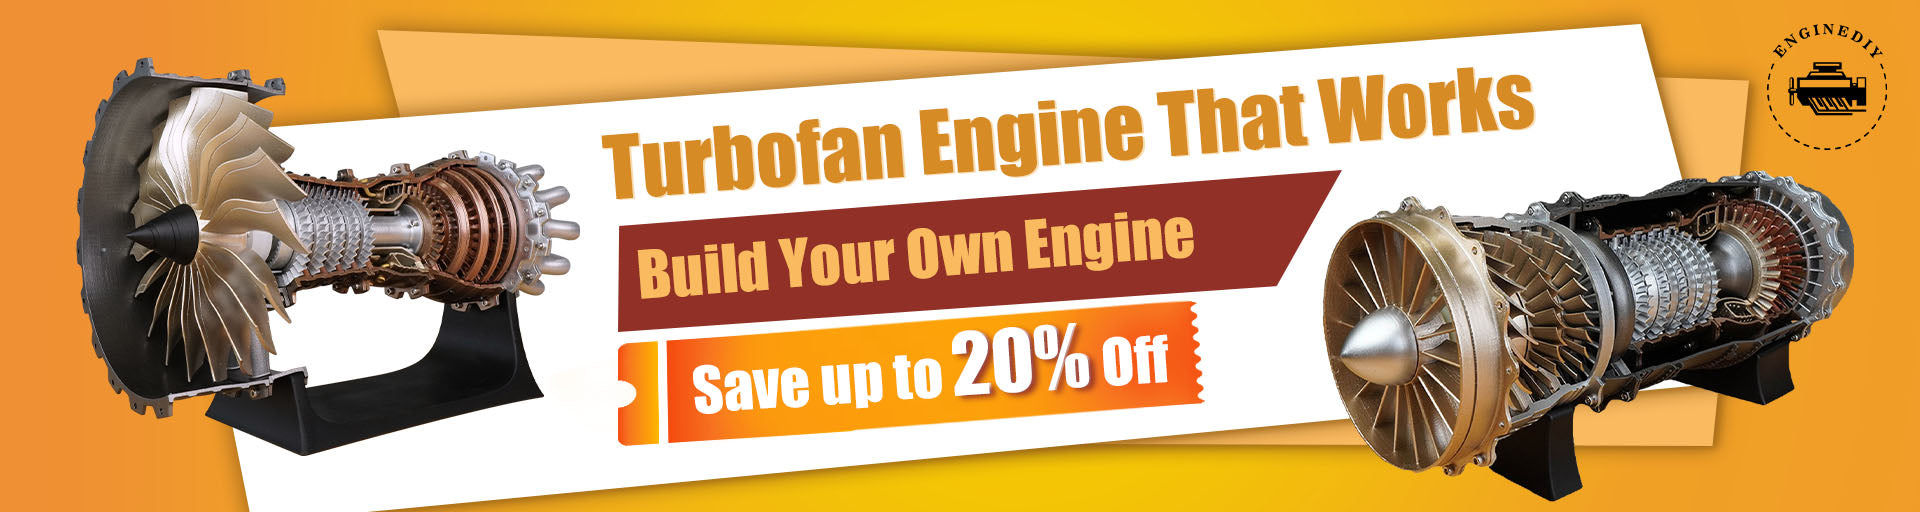 build your turbofan engine that works for sale